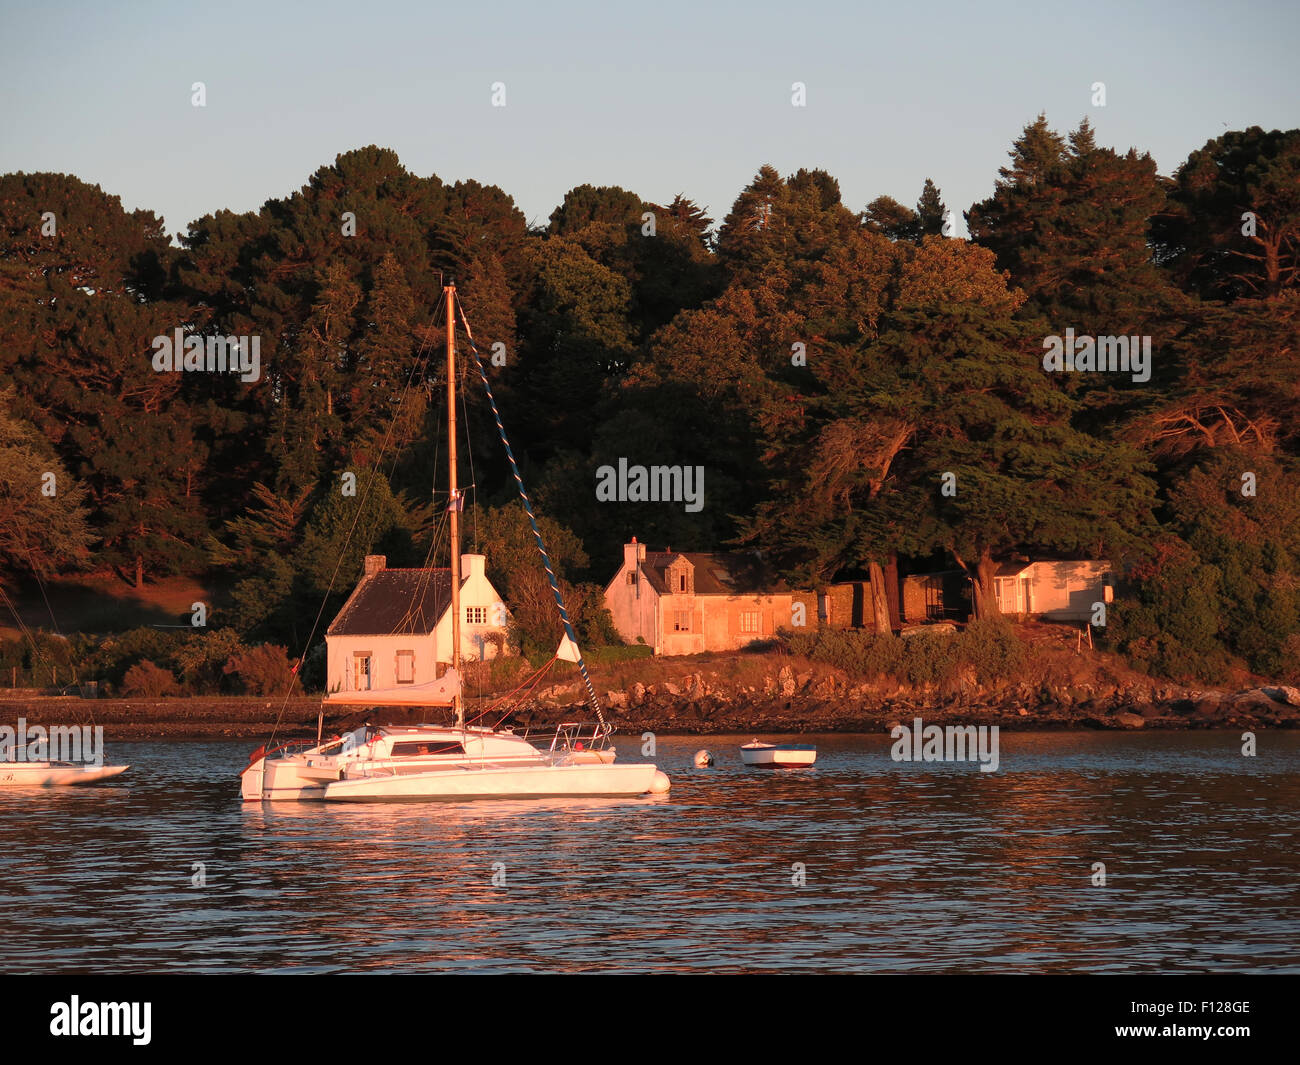 Gulf of Morbihan: boats moored off Île-aux-Moines Stock Photo